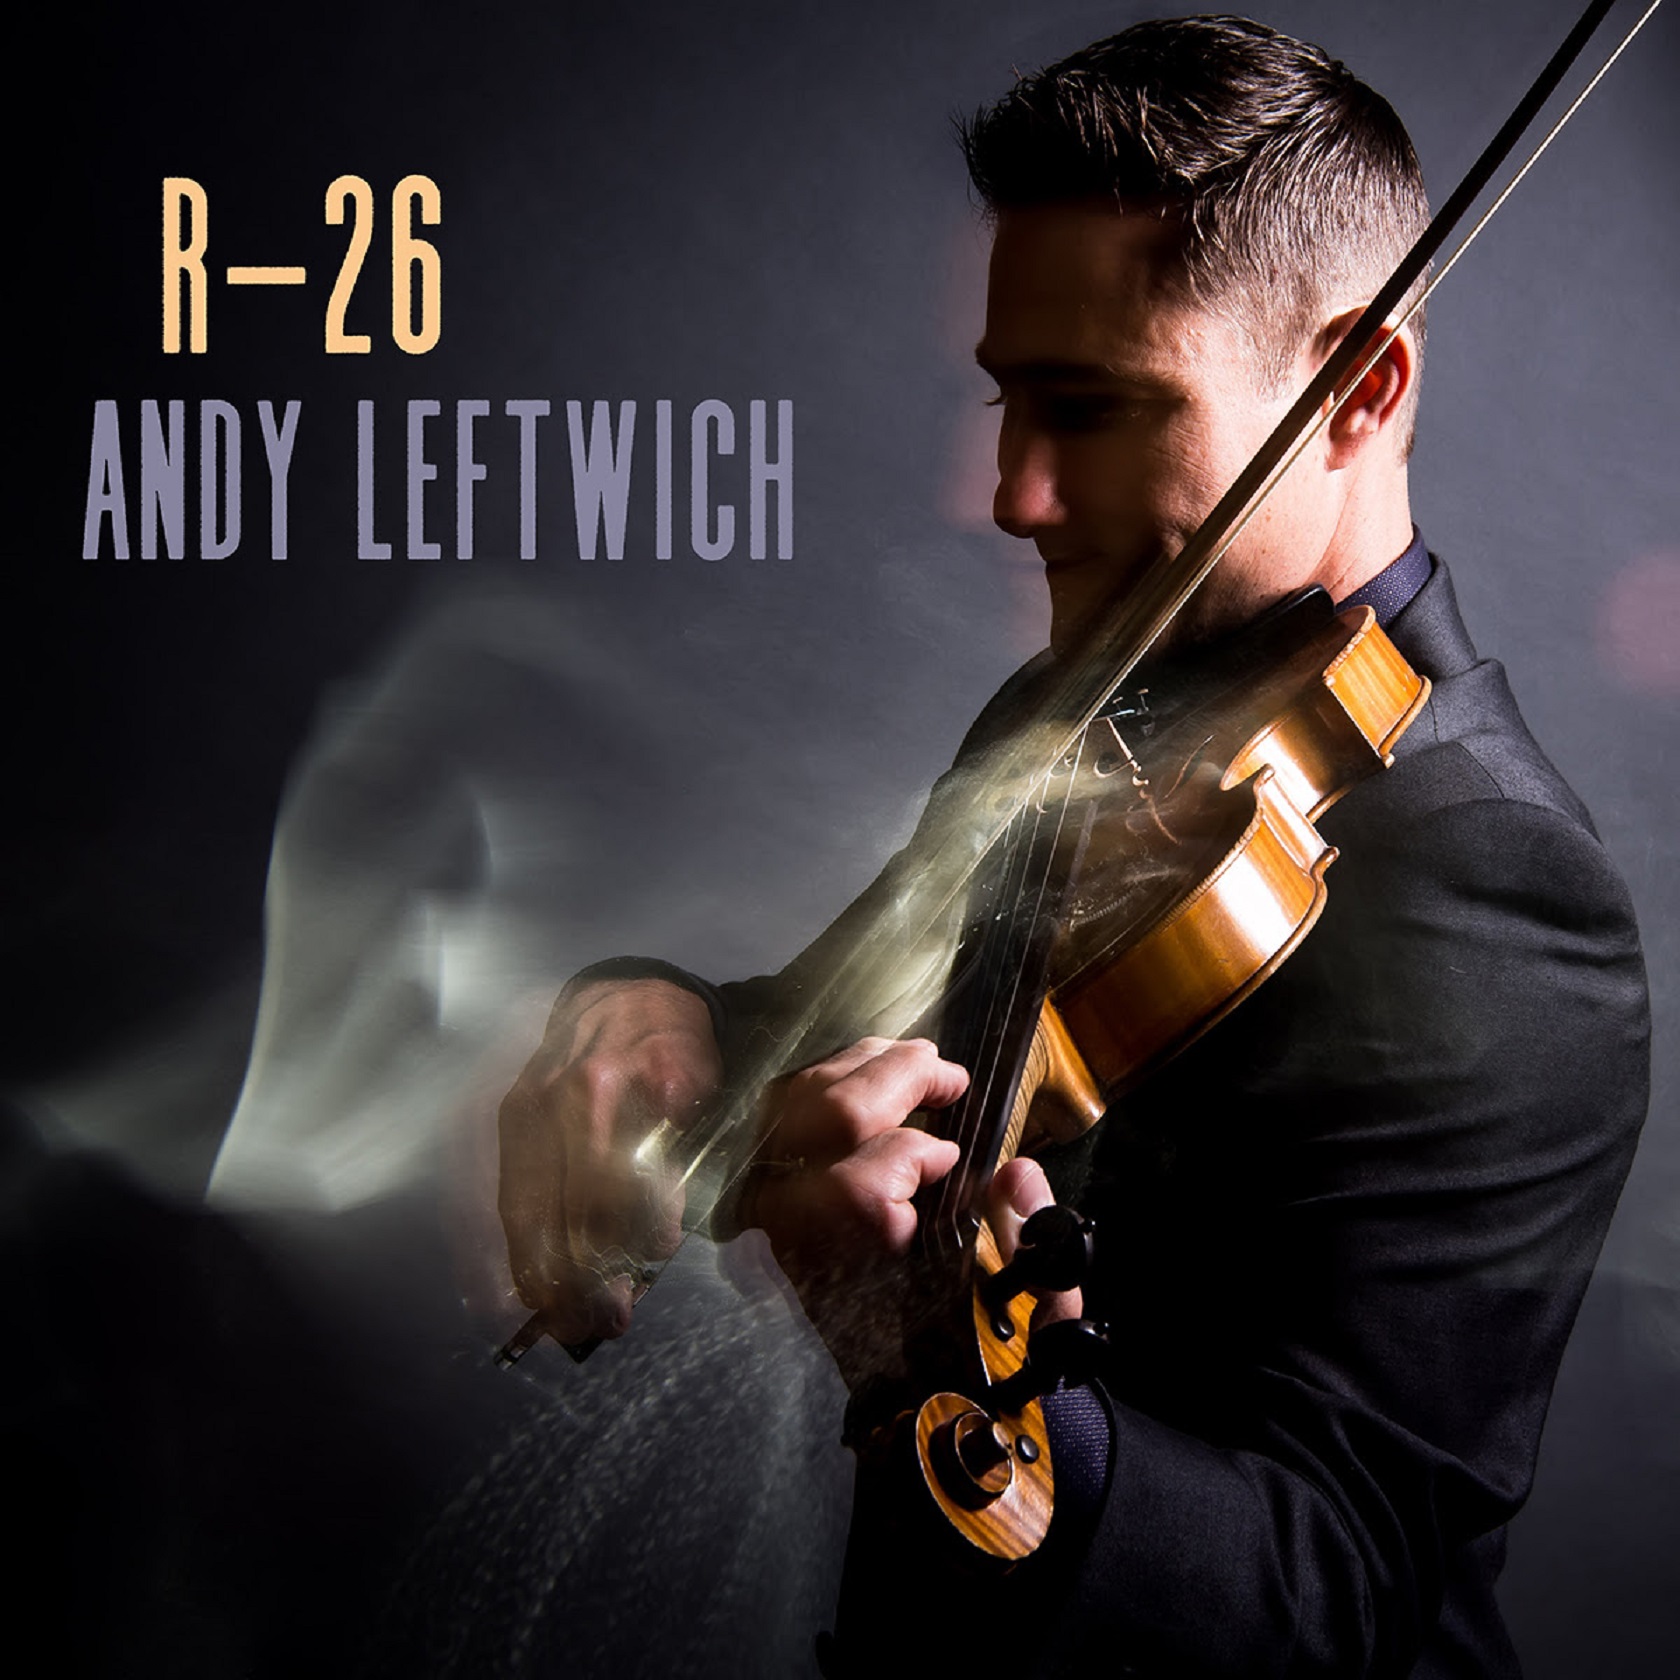 Andy Leftwich's “R-26” delivers a swinging change of pace